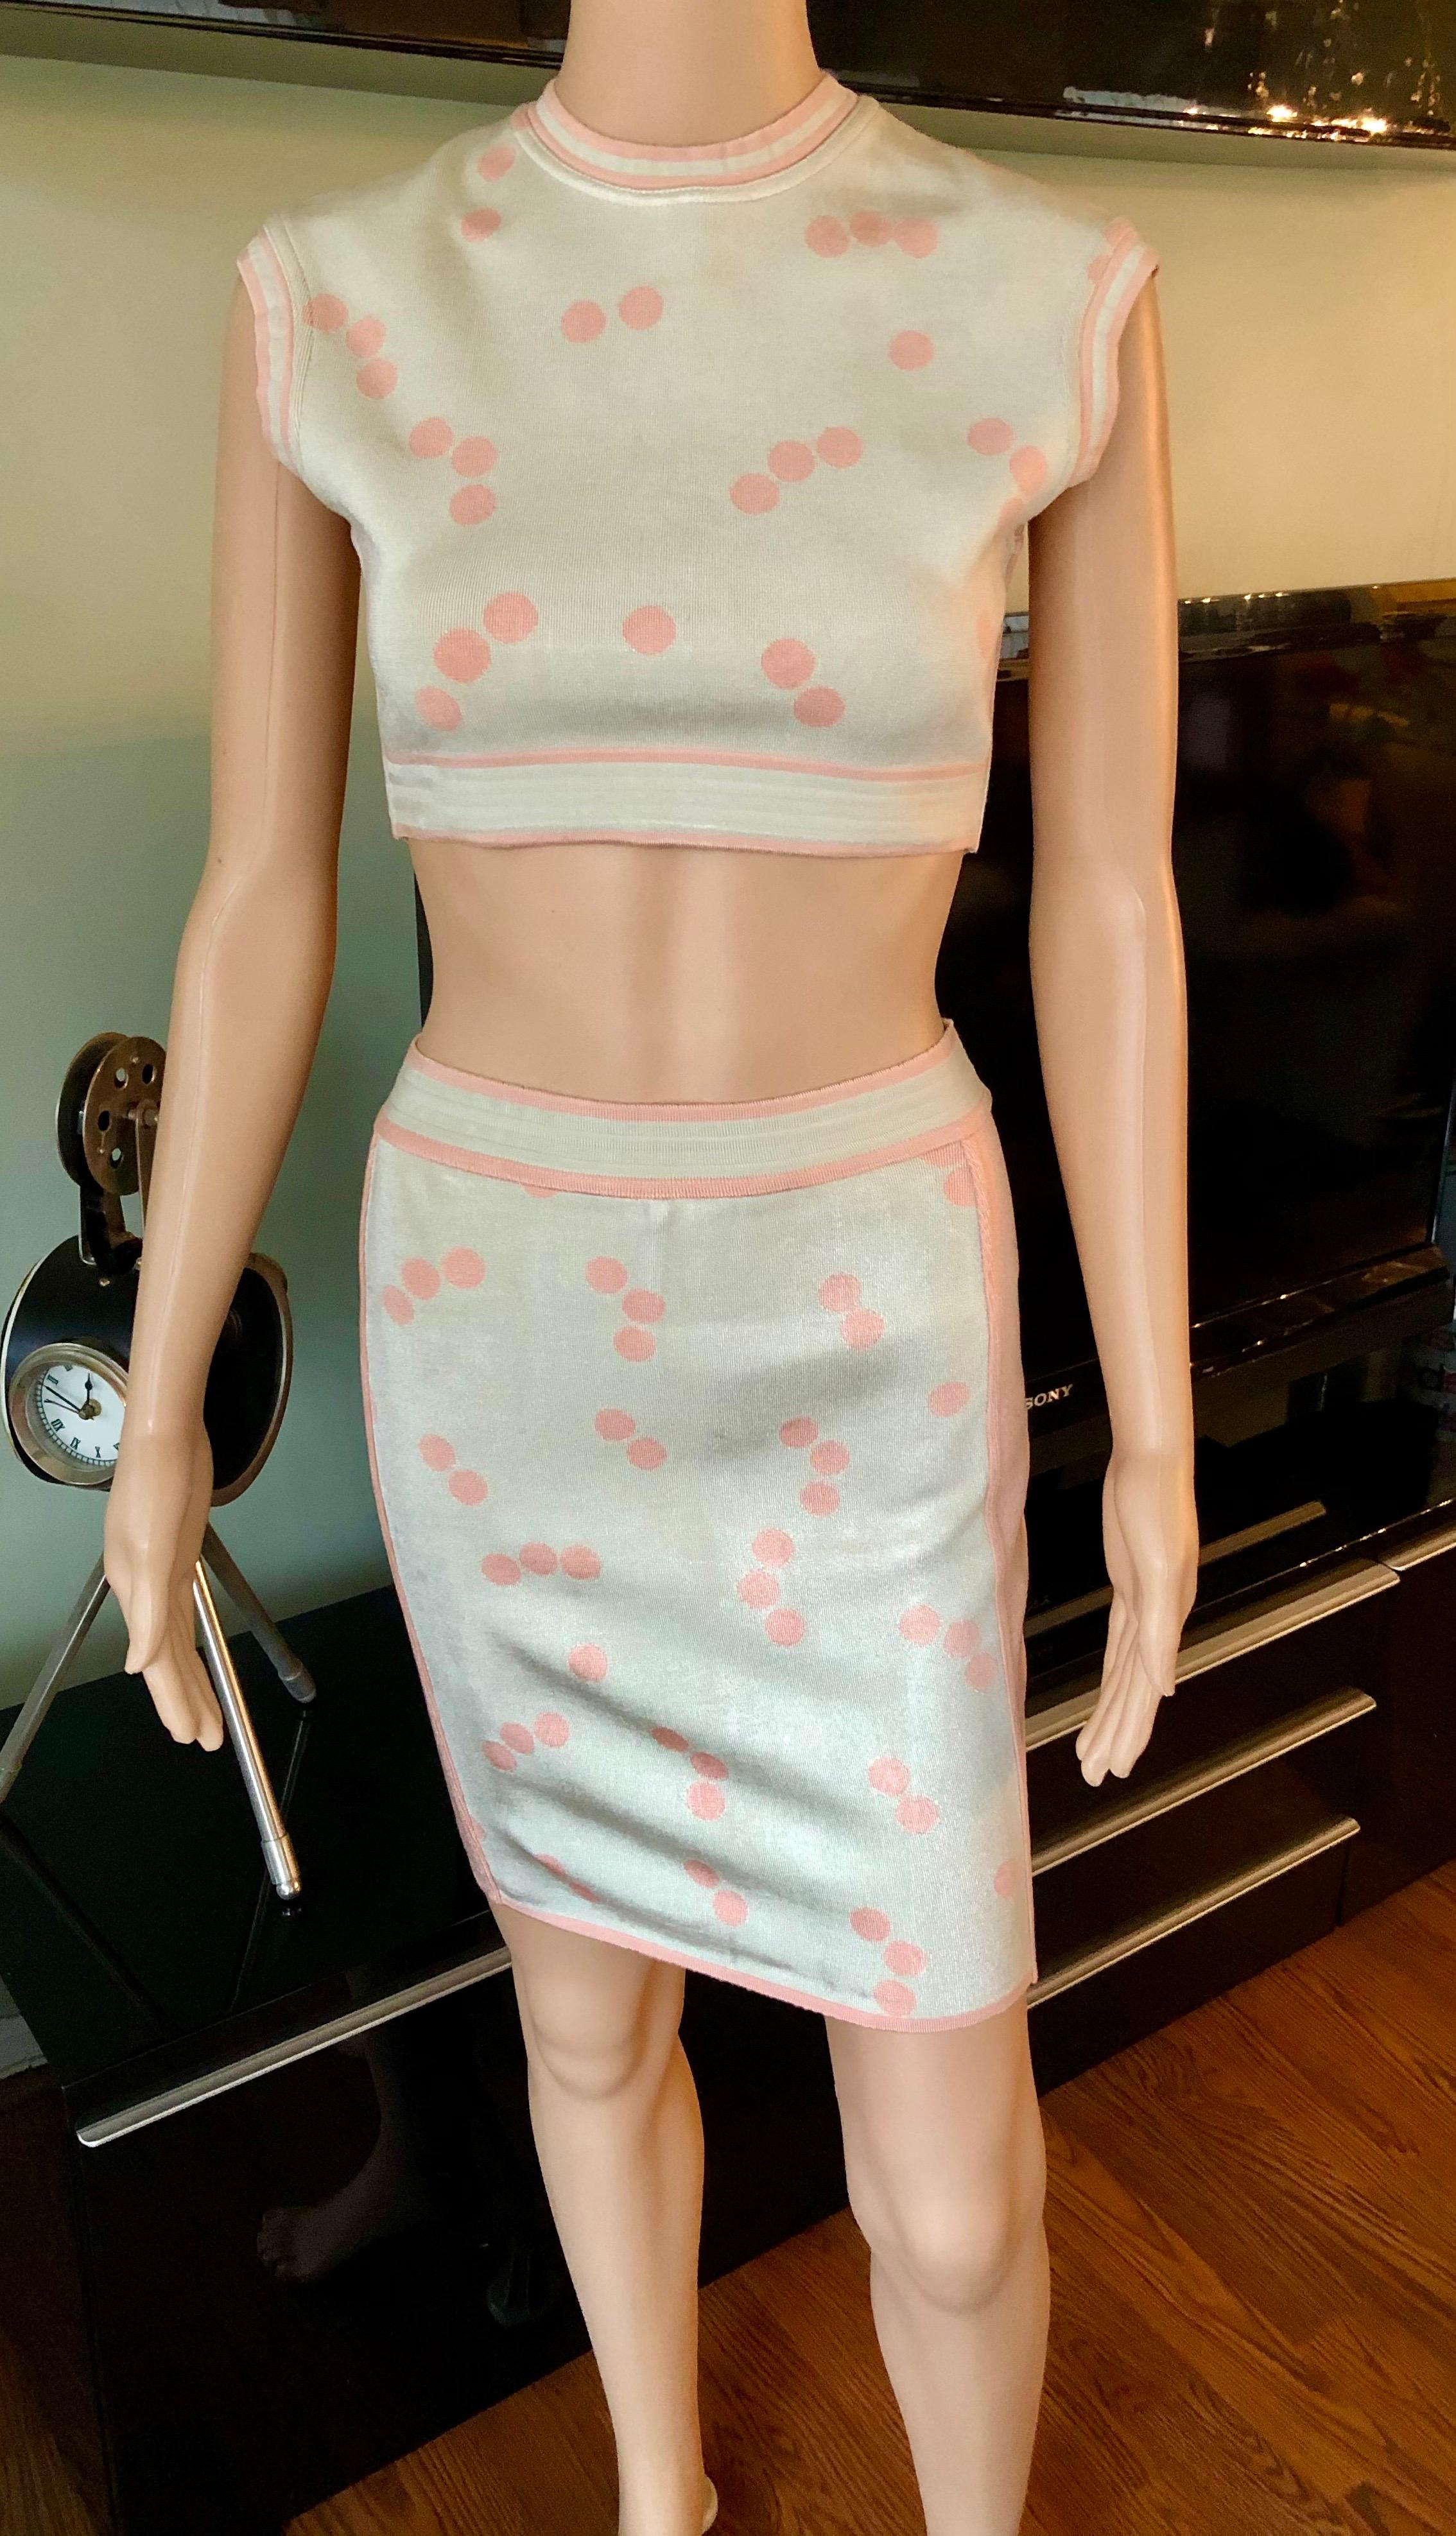 Azzedine Alaia S/S 1991 Vintage Skirt and Crop Top 2 Piece Set  In Good Condition For Sale In Naples, FL